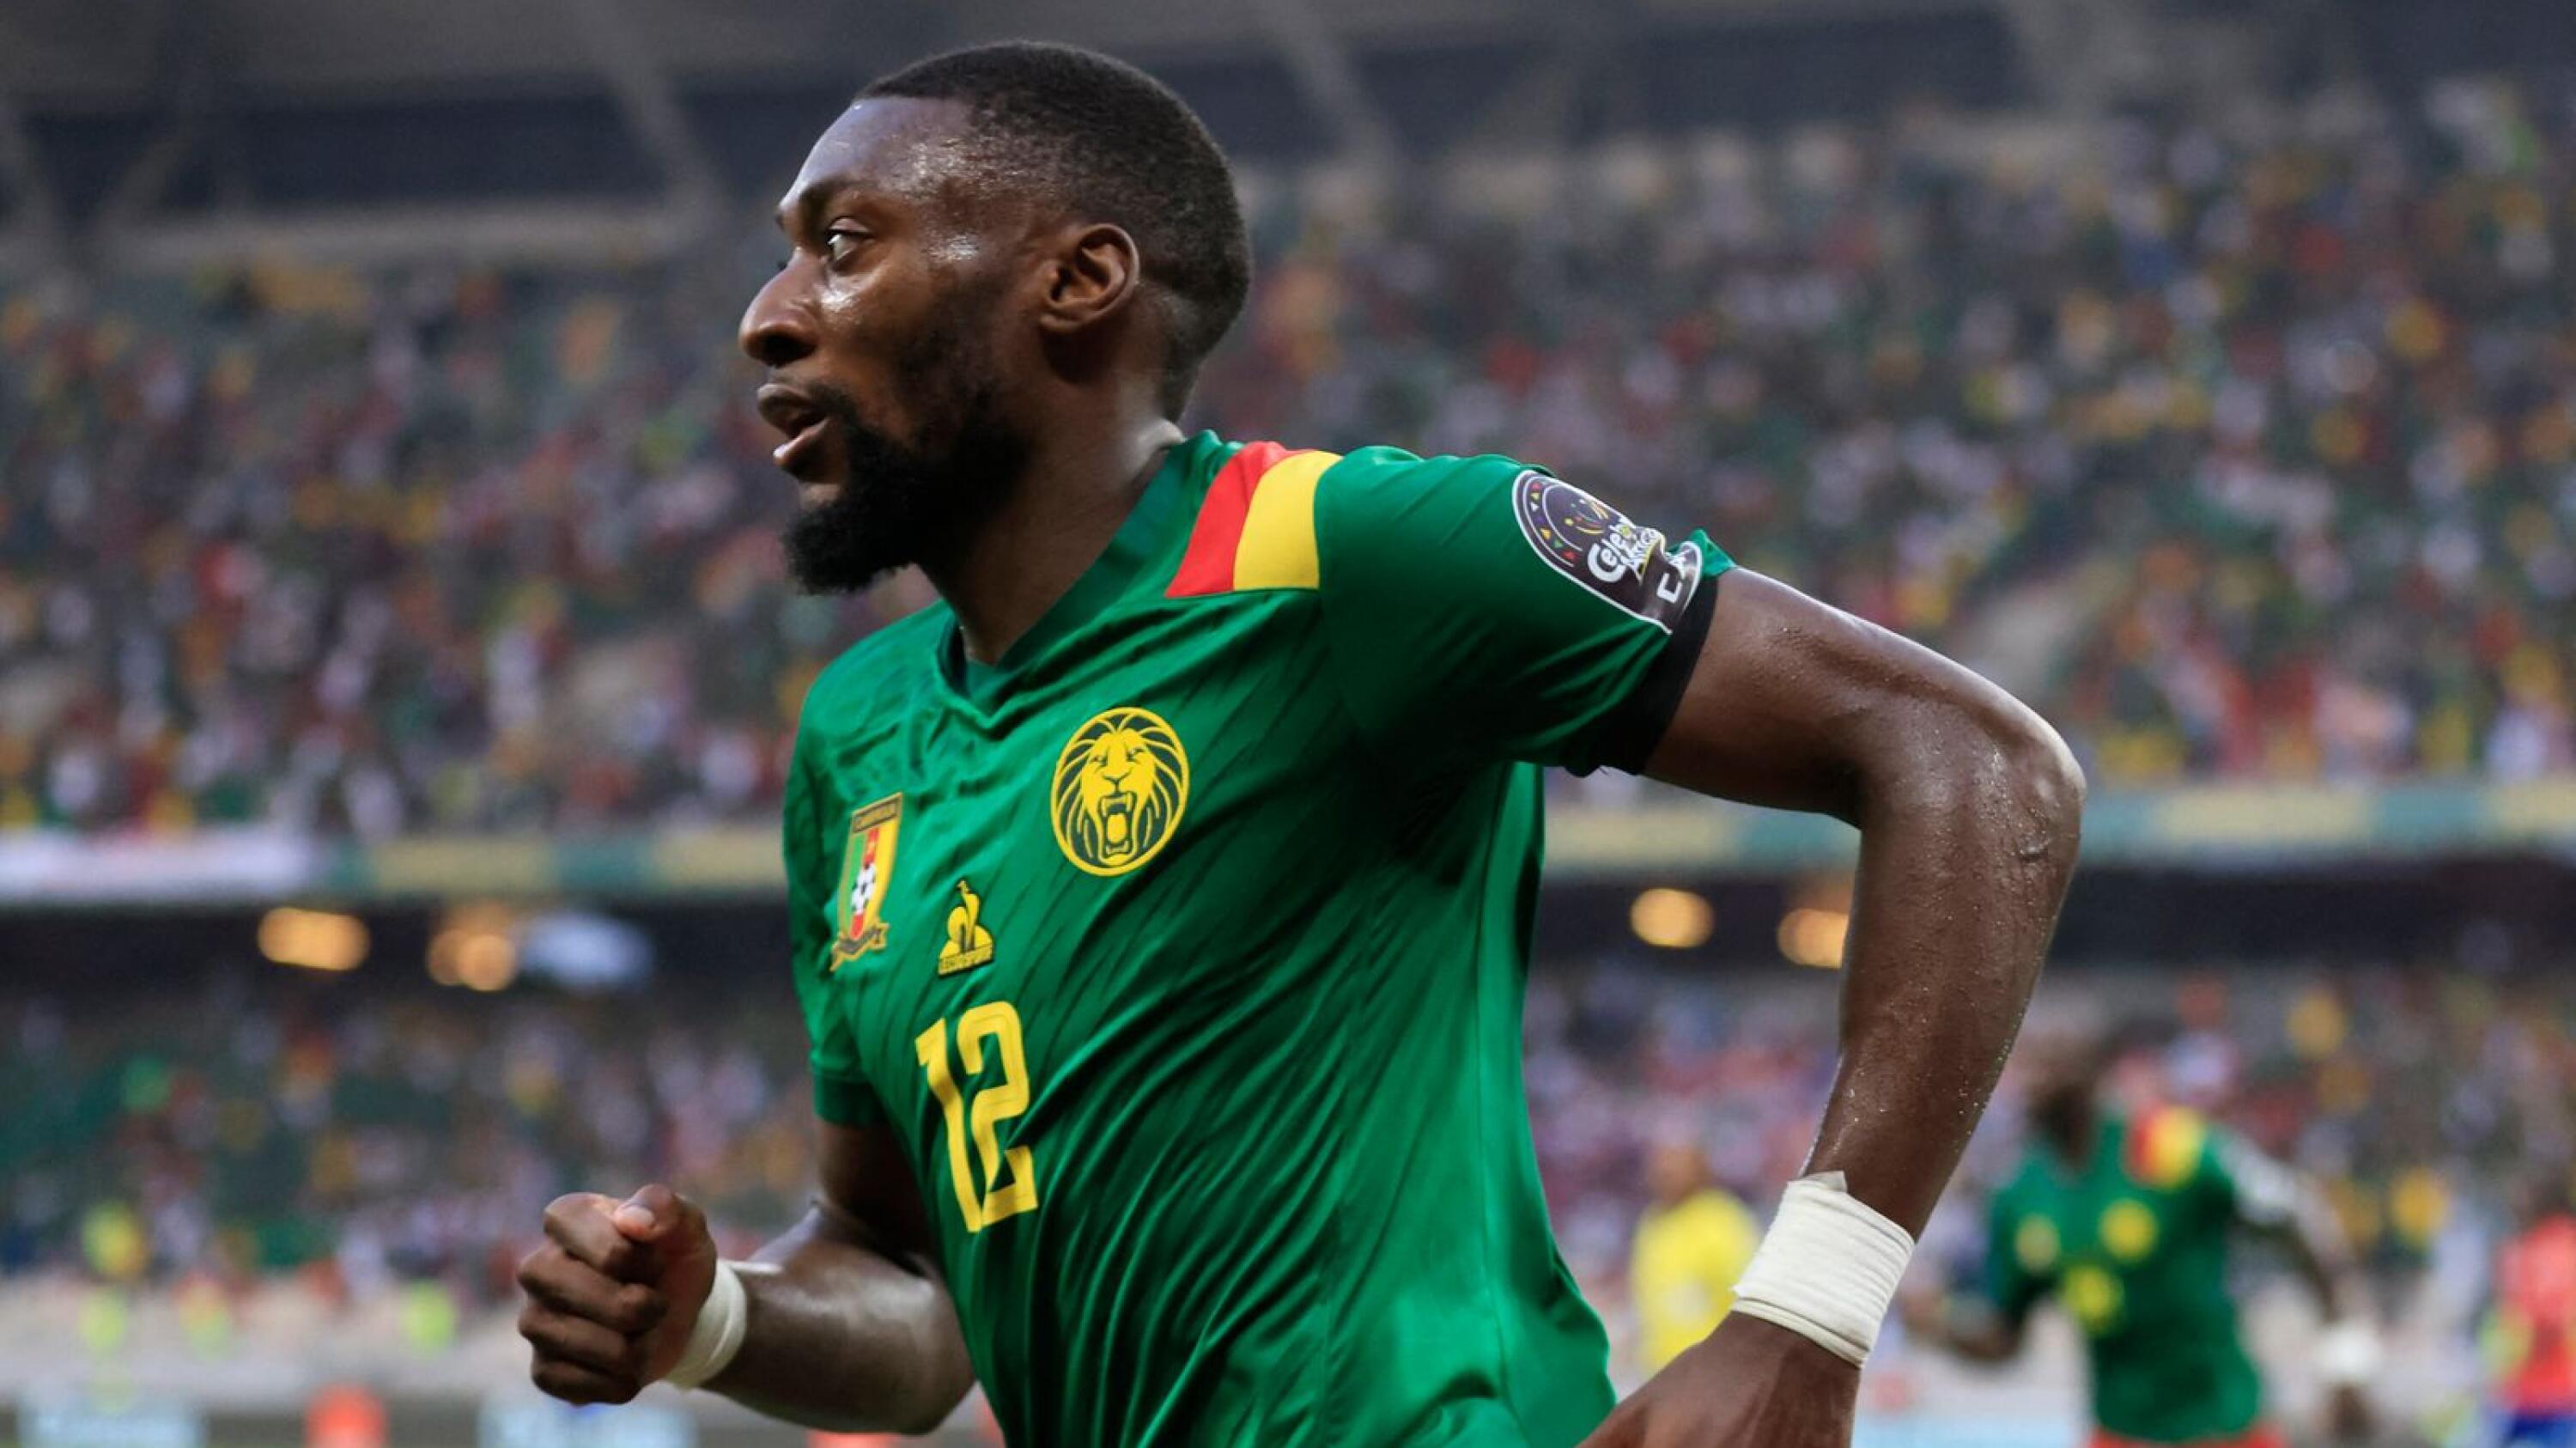 Cameroon's Karl Toko-Ekambi celebrates after scoring their second goal during their Africa Cup of Nations quarter-final clash against Gambia at Stade de Japoma, Douala on Saturday